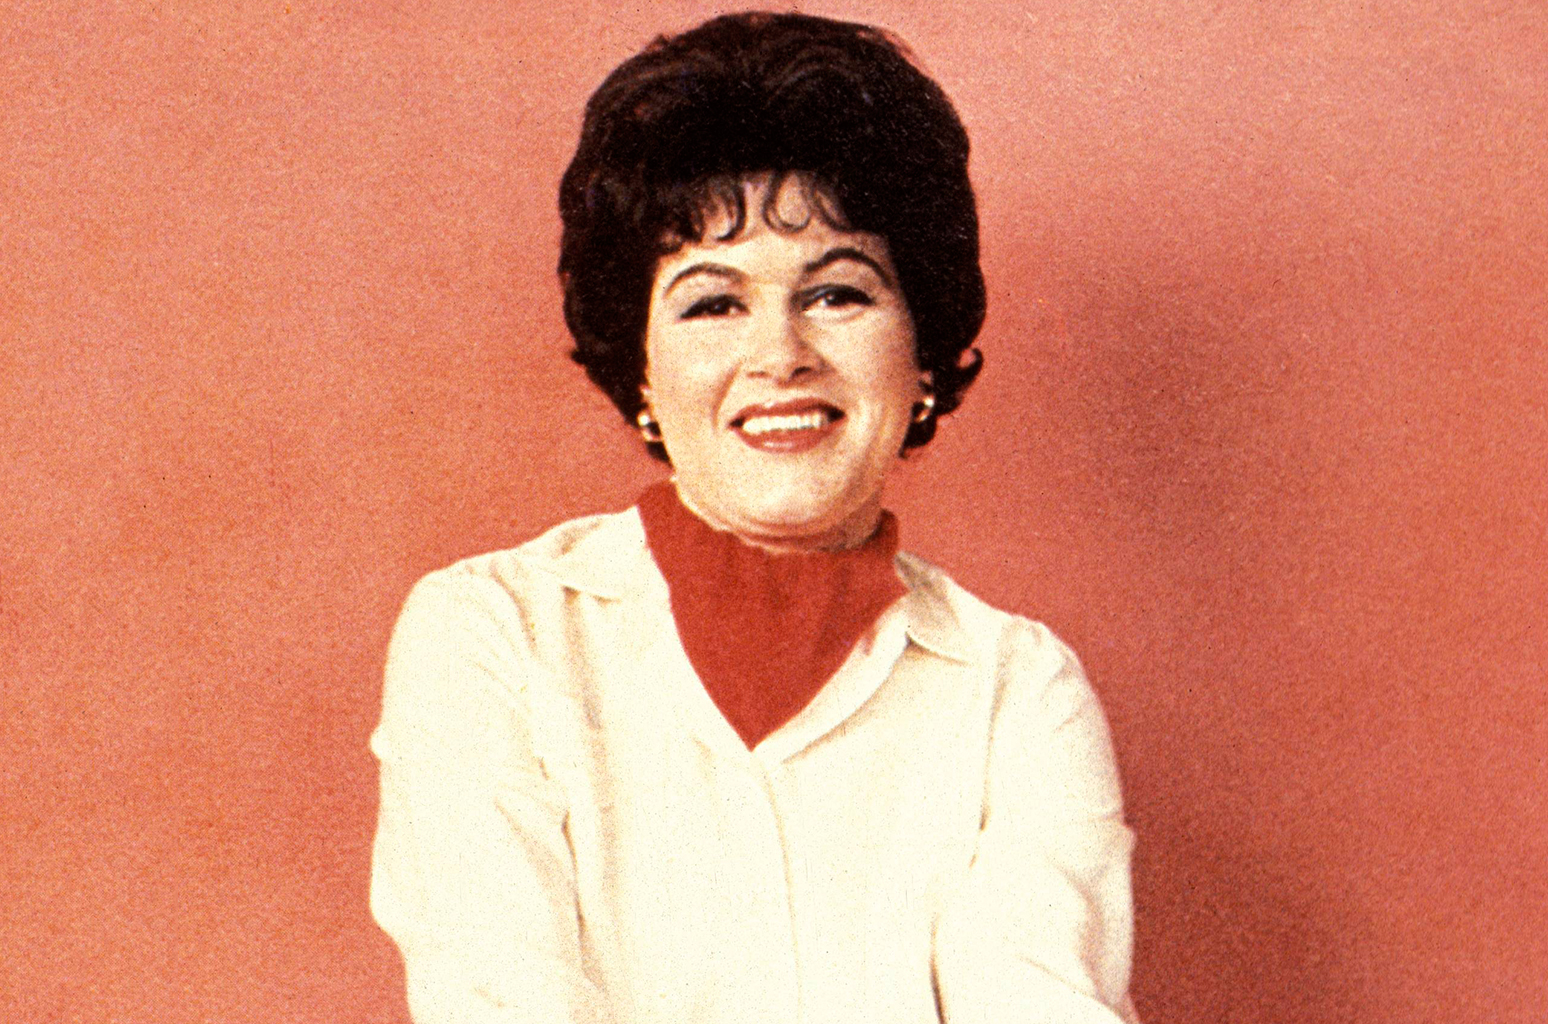 Patsy Cline smiling